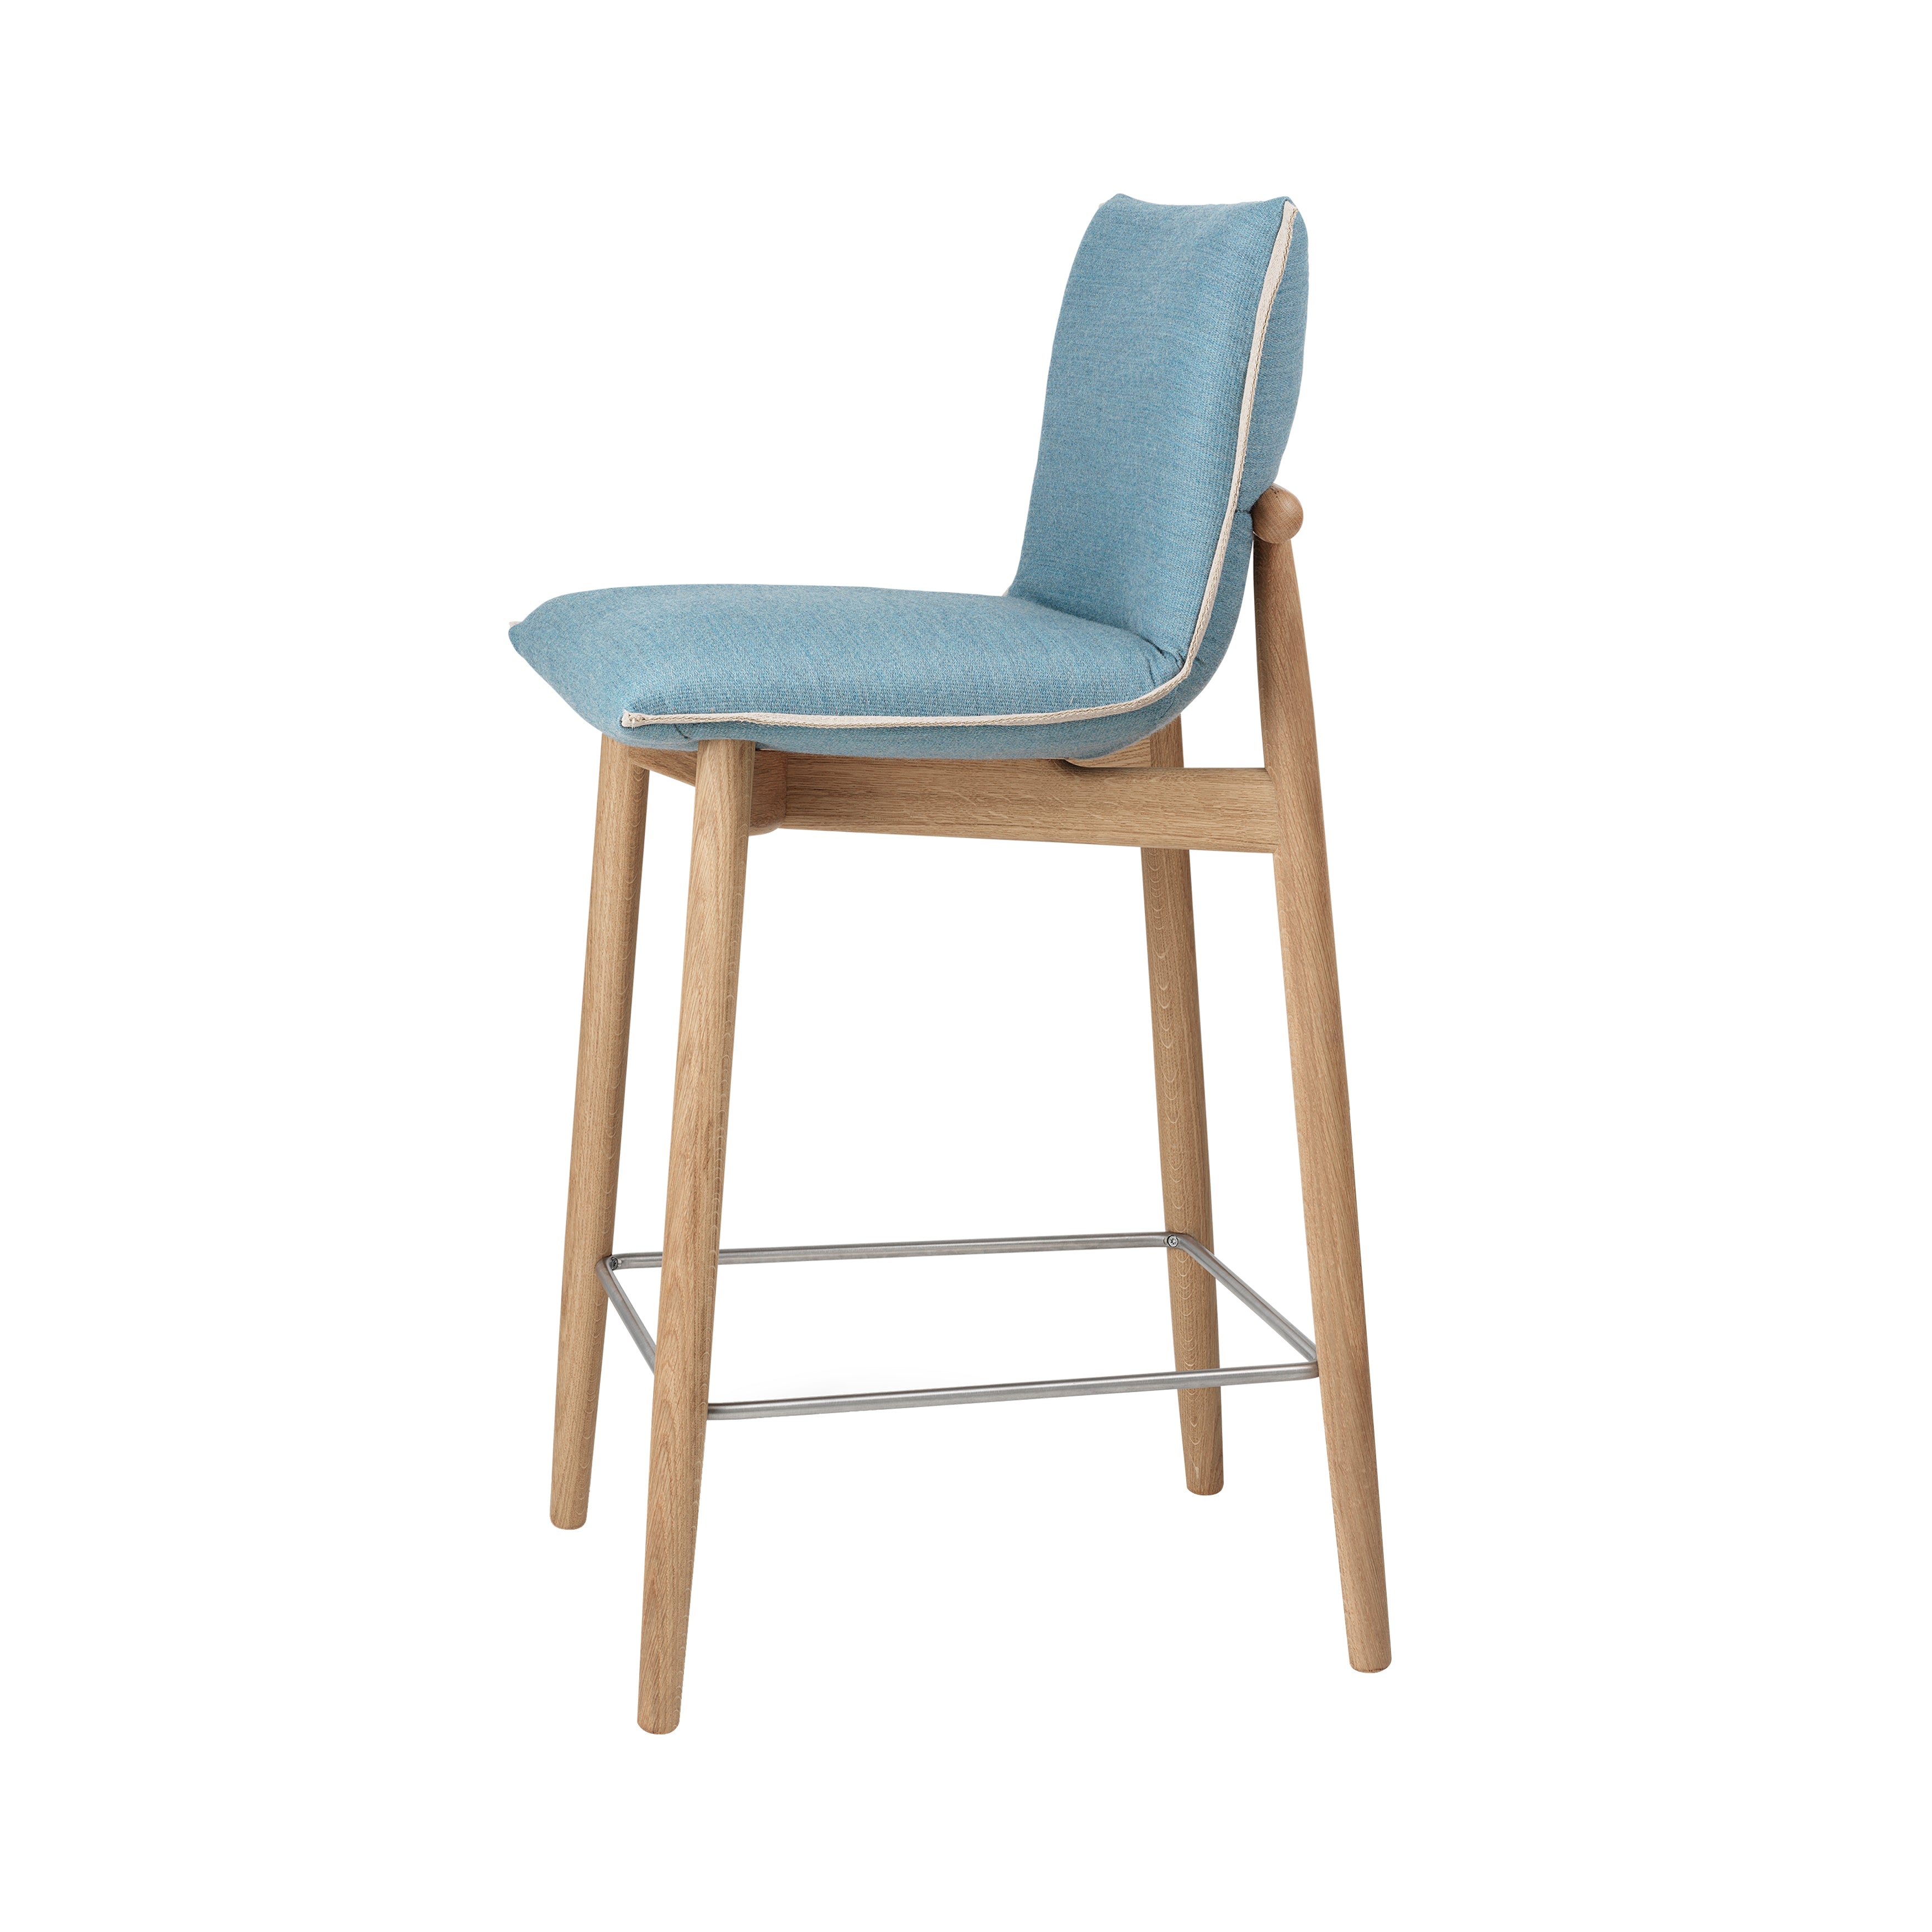 E007 Embrace Counter Stool: Stainless Steel + Natural Edging Strip + Oiled Oak